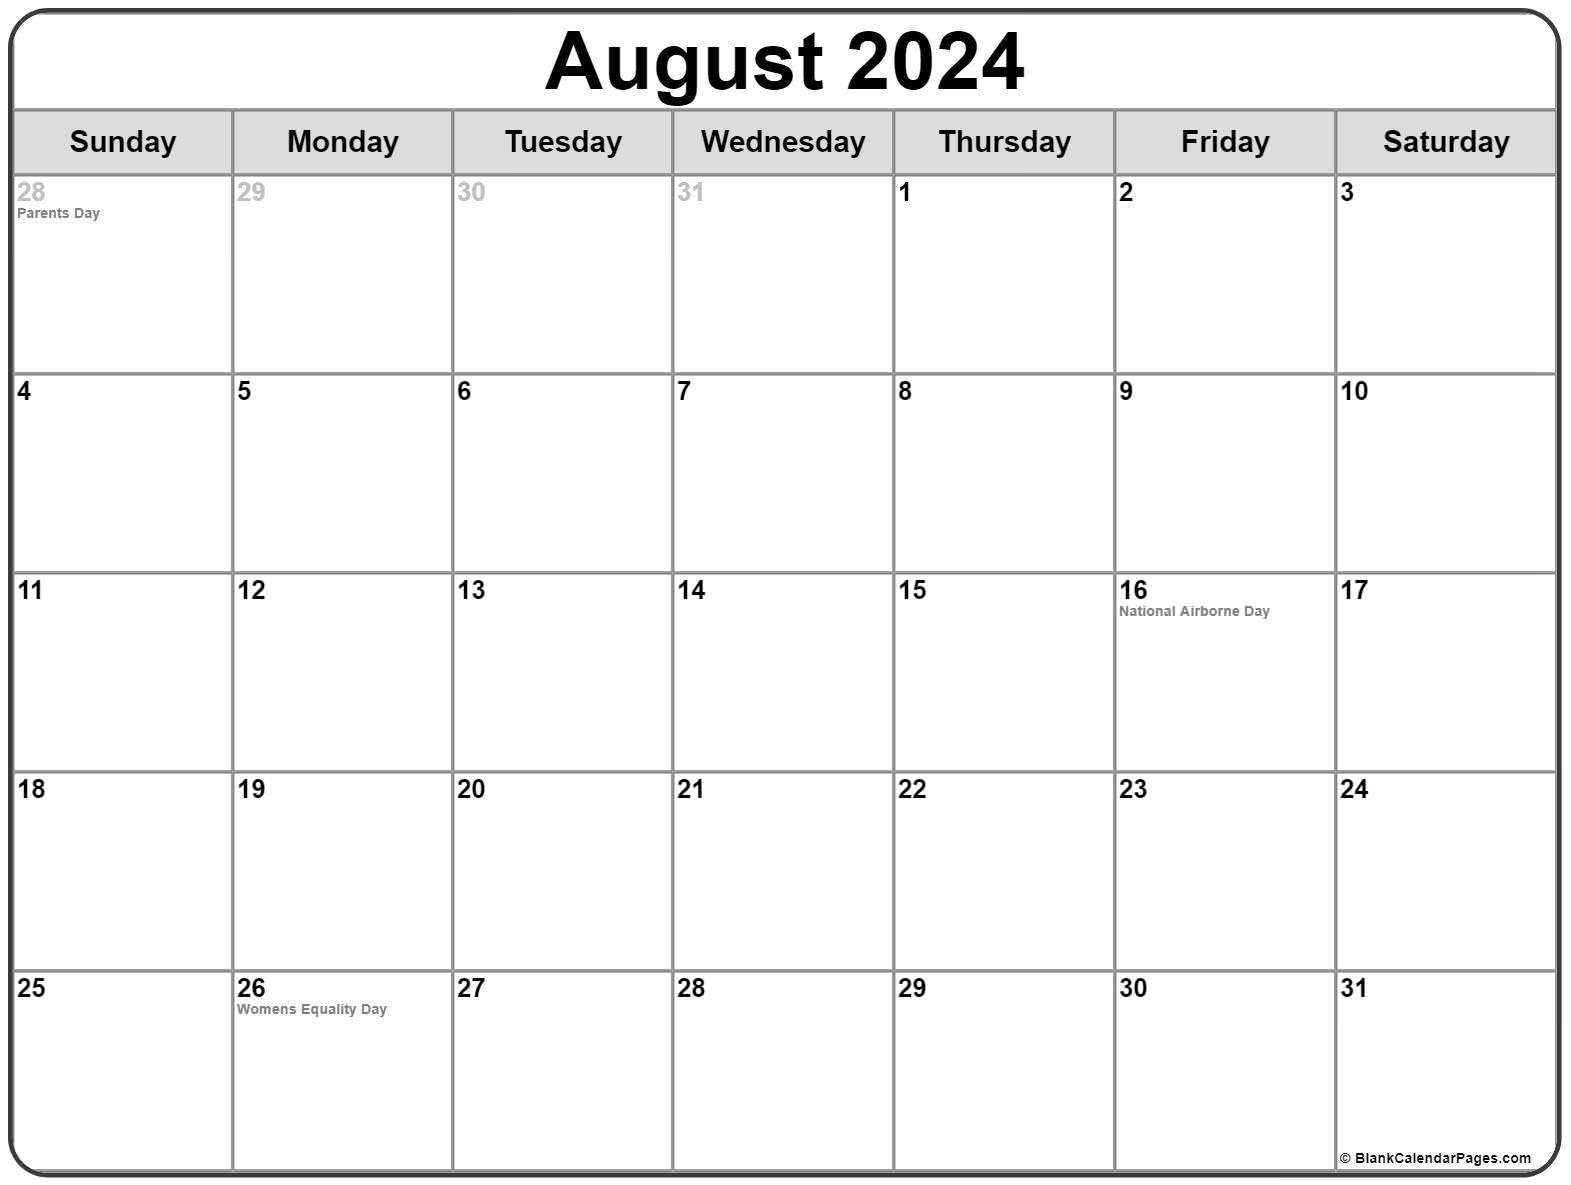 collection-of-august-2018-calendars-with-holidays